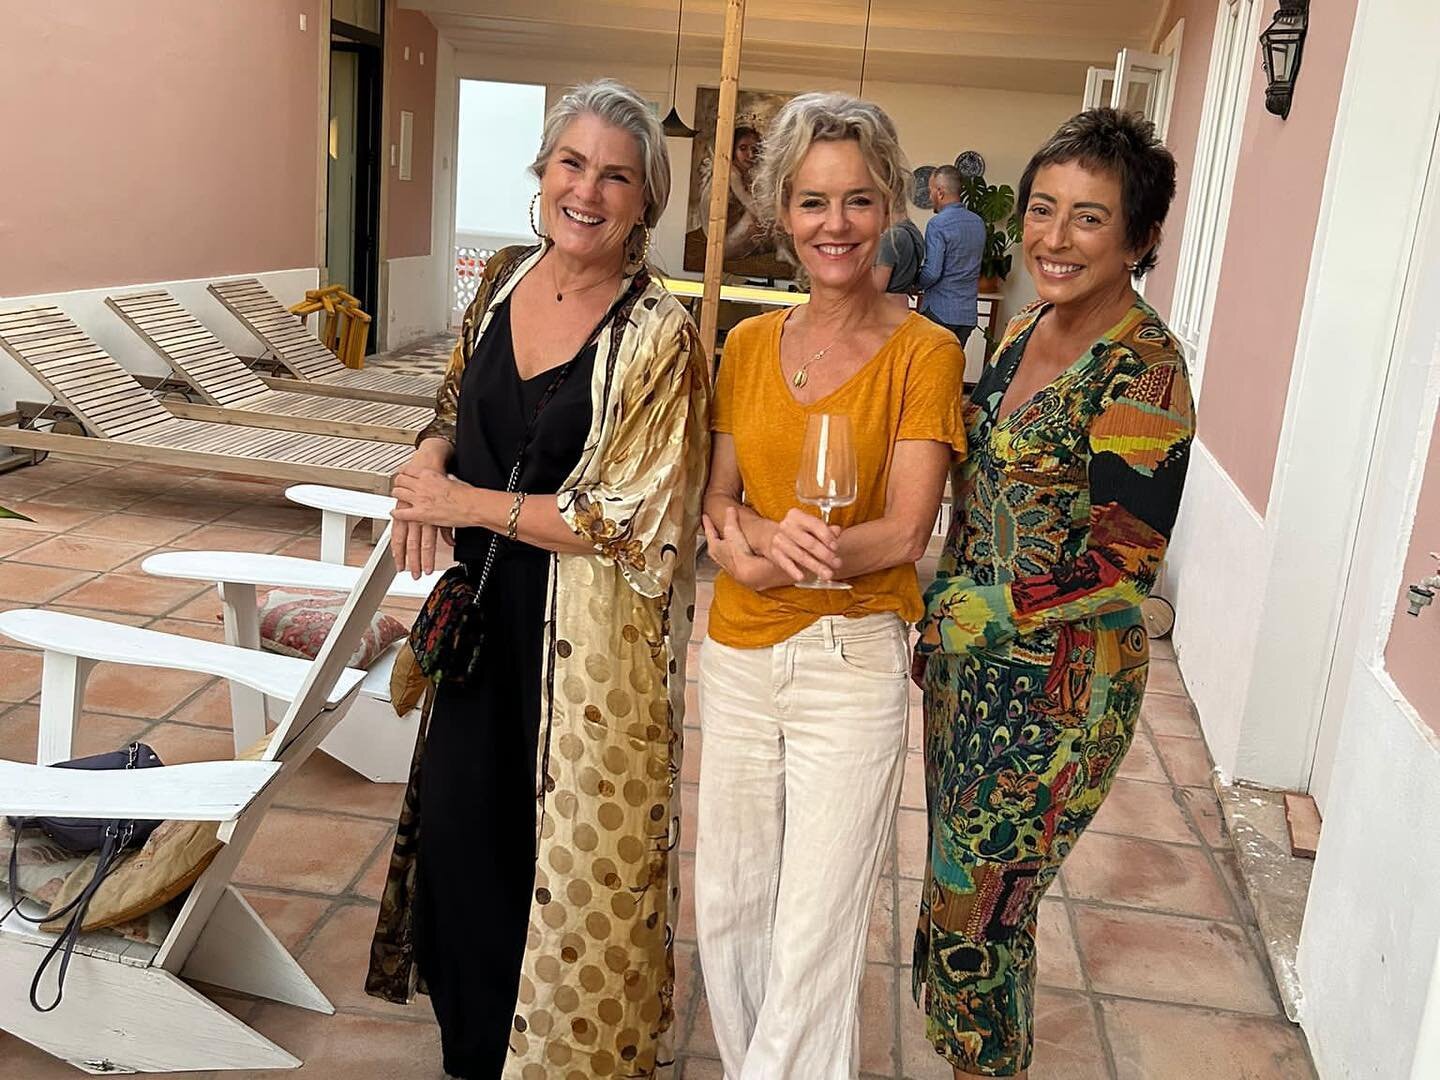 A lovely dinner with old and new friends in Portim&atilde;o to celebrate the beautiful soul and artist that is Meinke Flessemen. Thank you for the invitation.